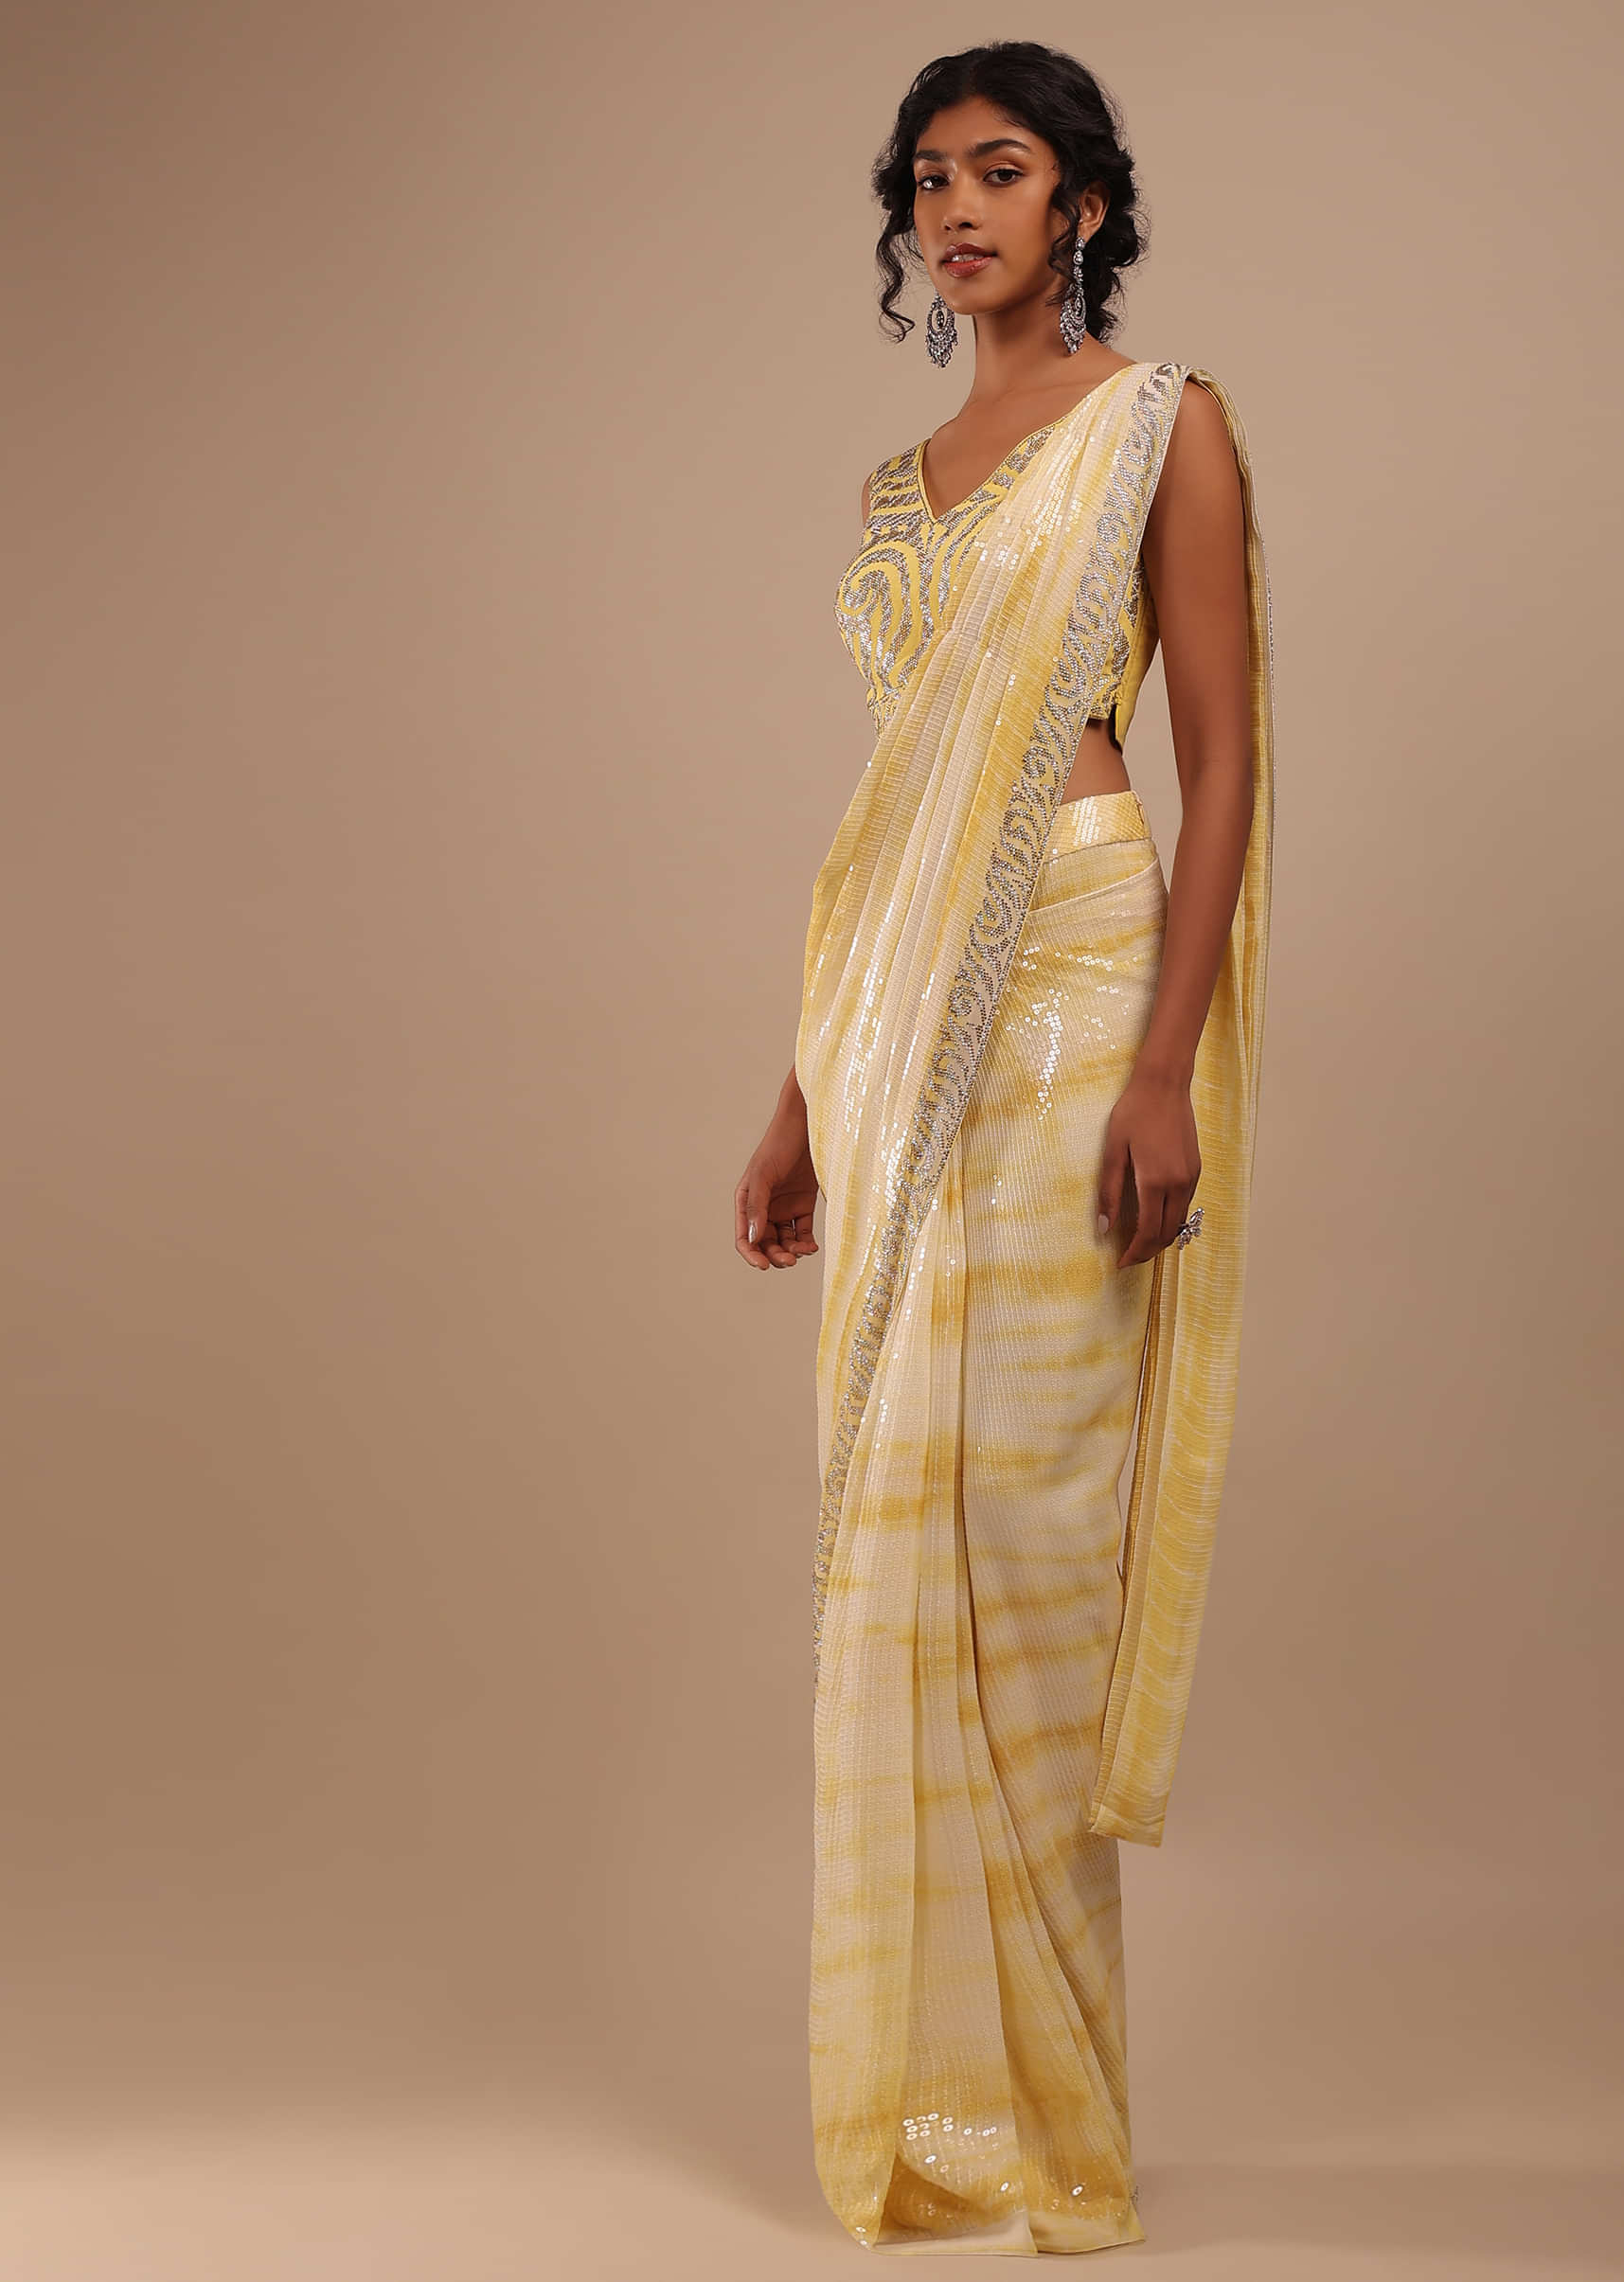 Lemon Yellow And Off-White Ombre Ready Pleated Sequins Saree With Multi-Color Beads Embellishment In Floral Detailing On Pallu Border